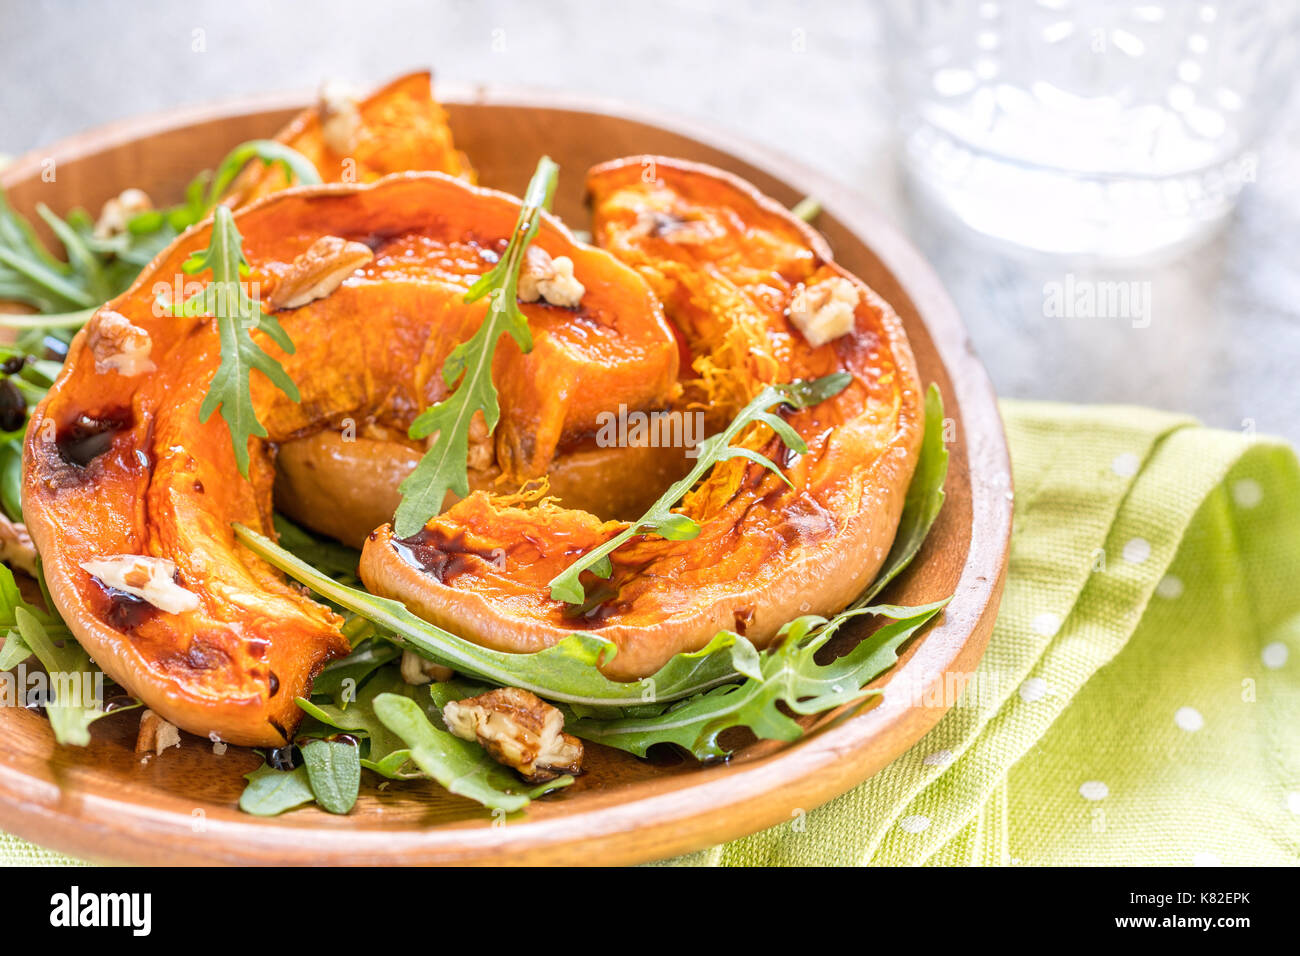 Roasted pumpkin with pecan nuts and arugula. Stock Photo